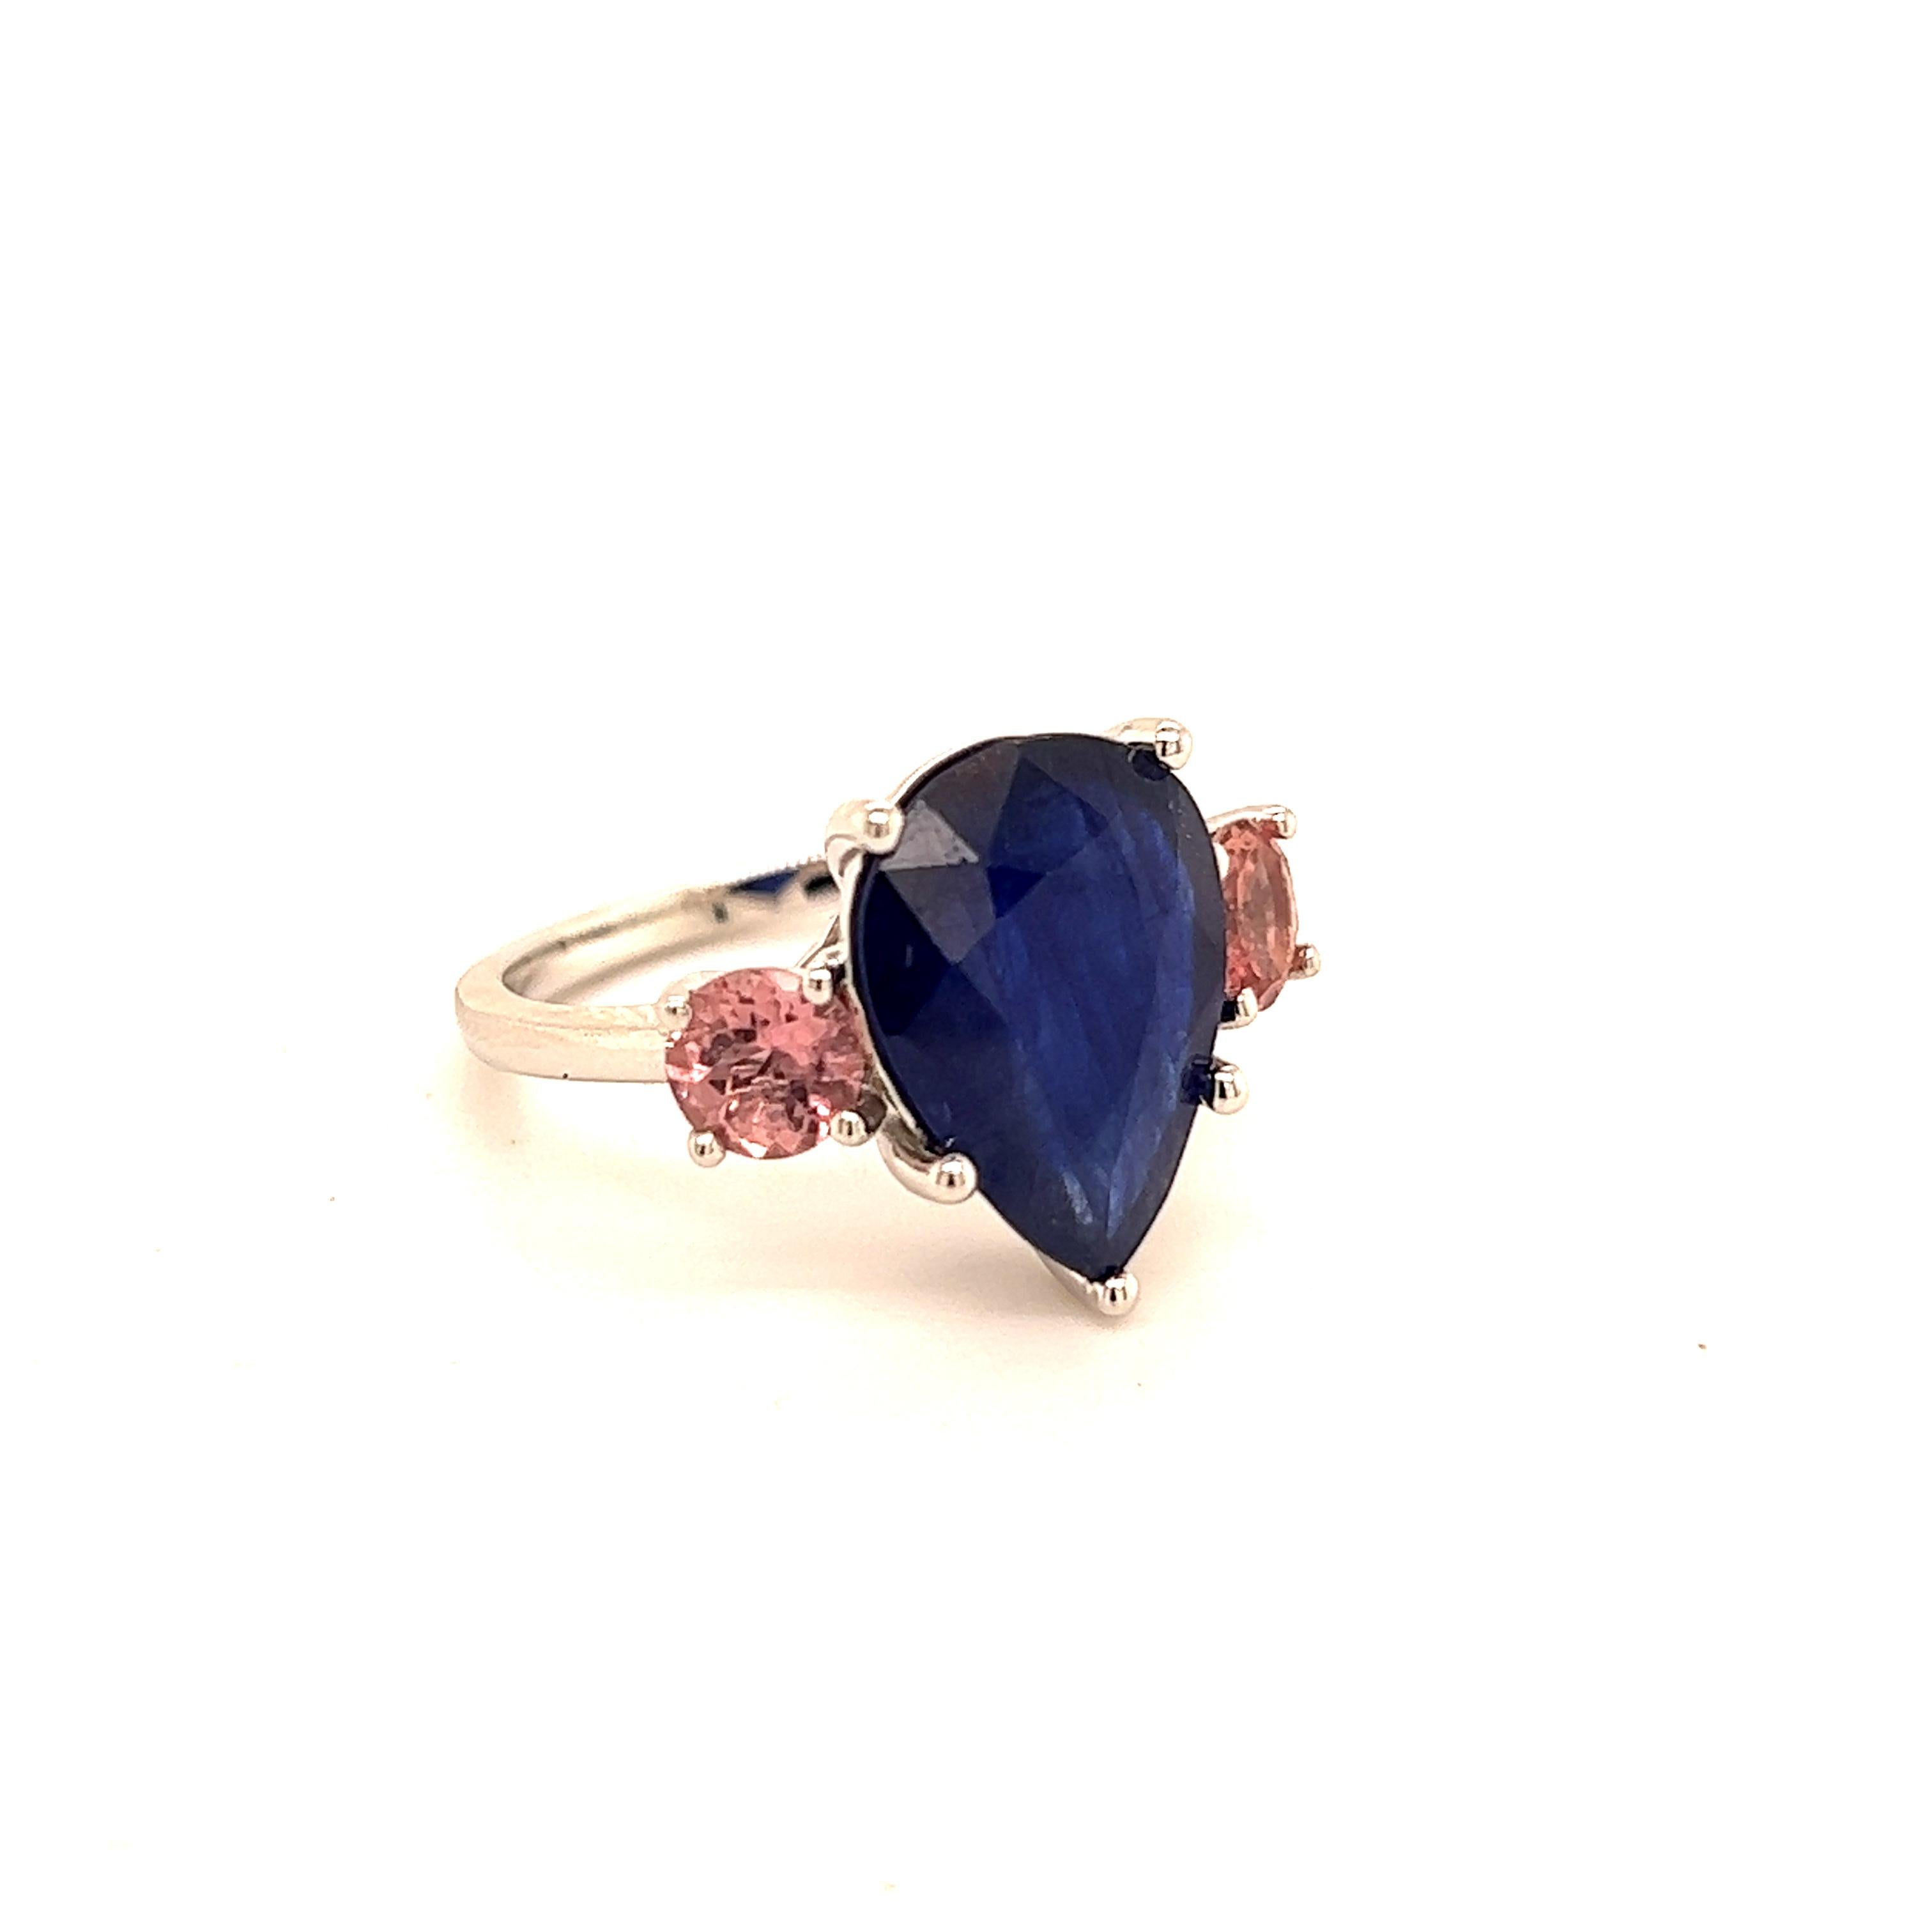 Natural Sapphire Diamond Ring 7 14k W Gold 6.16 TCW Certified For Sale 6